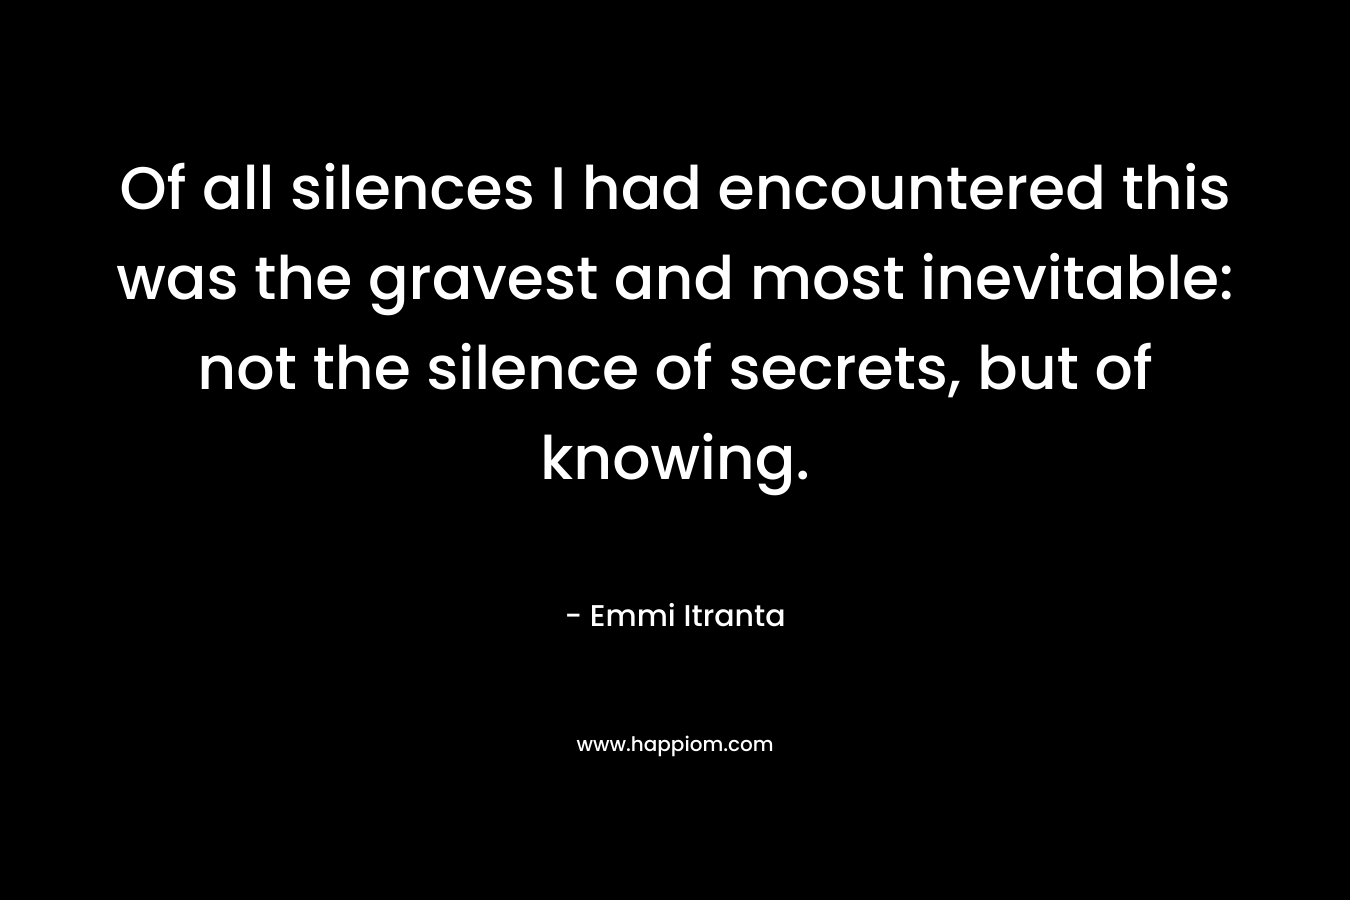 Of all silences I had encountered this was the gravest and most inevitable: not the silence of secrets, but of knowing. – Emmi Itranta